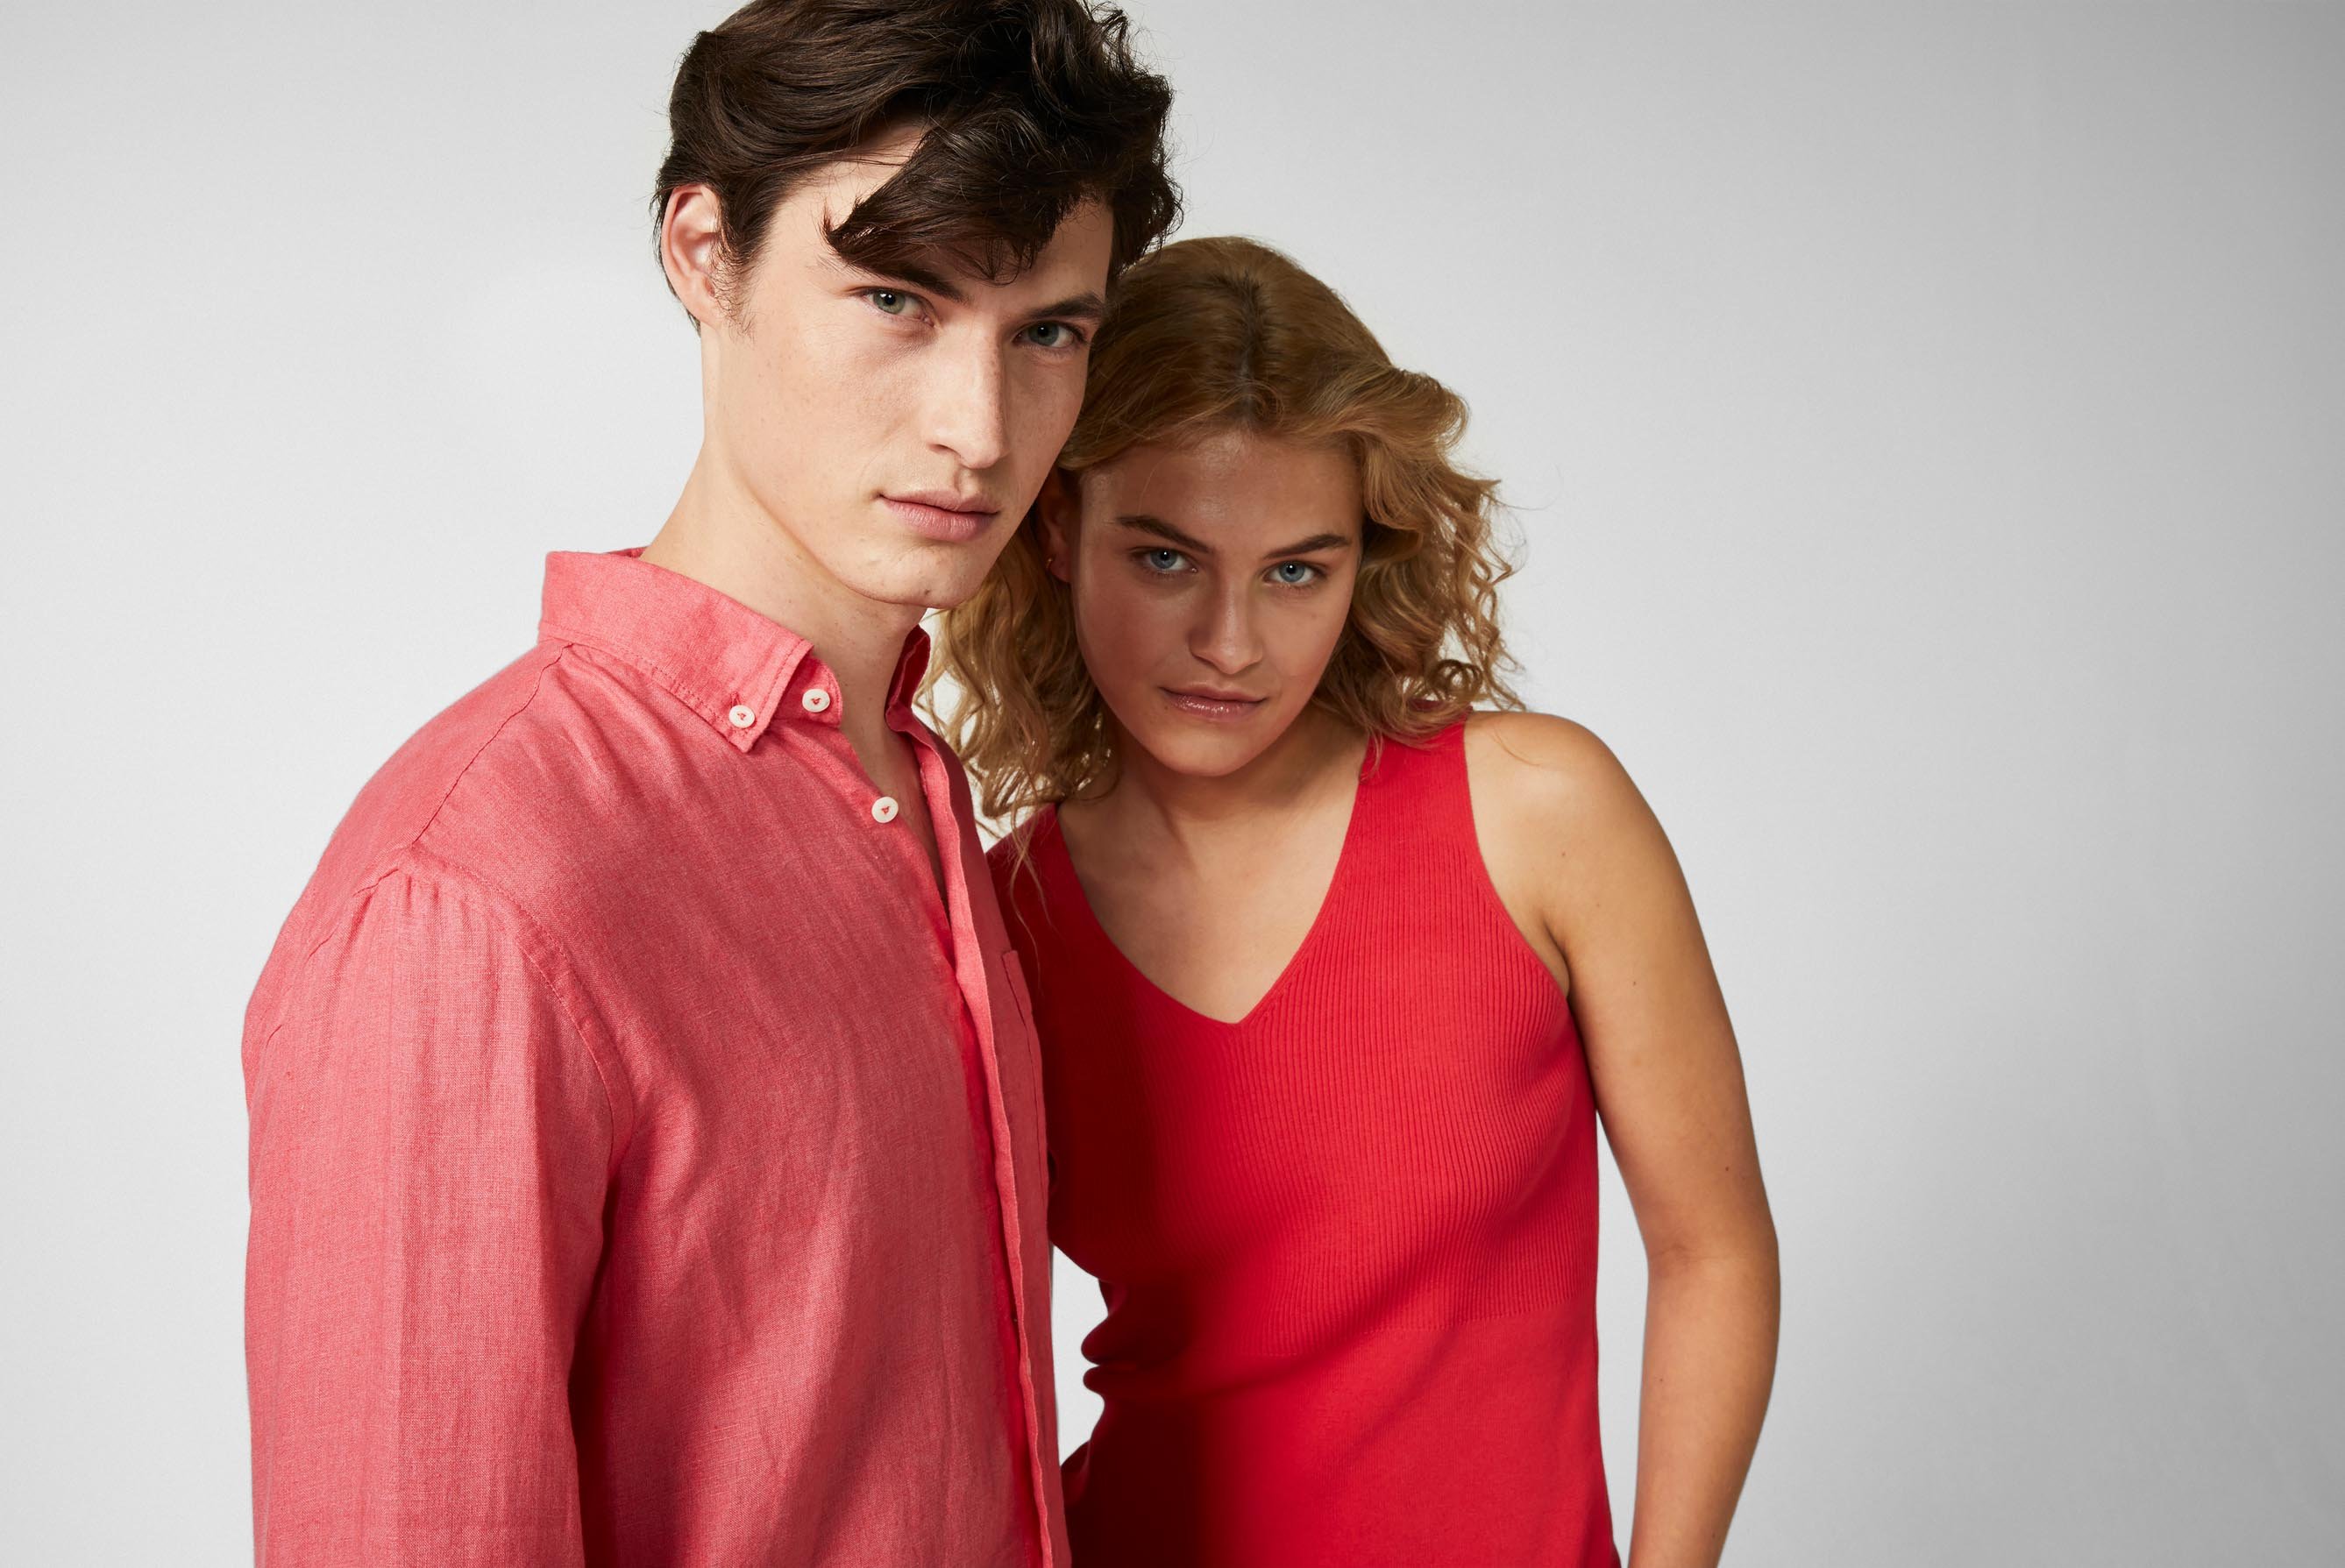 Tops & T-Shirts+Slim fit cotton tank top rot/rose+09.9966..S00192.540.L